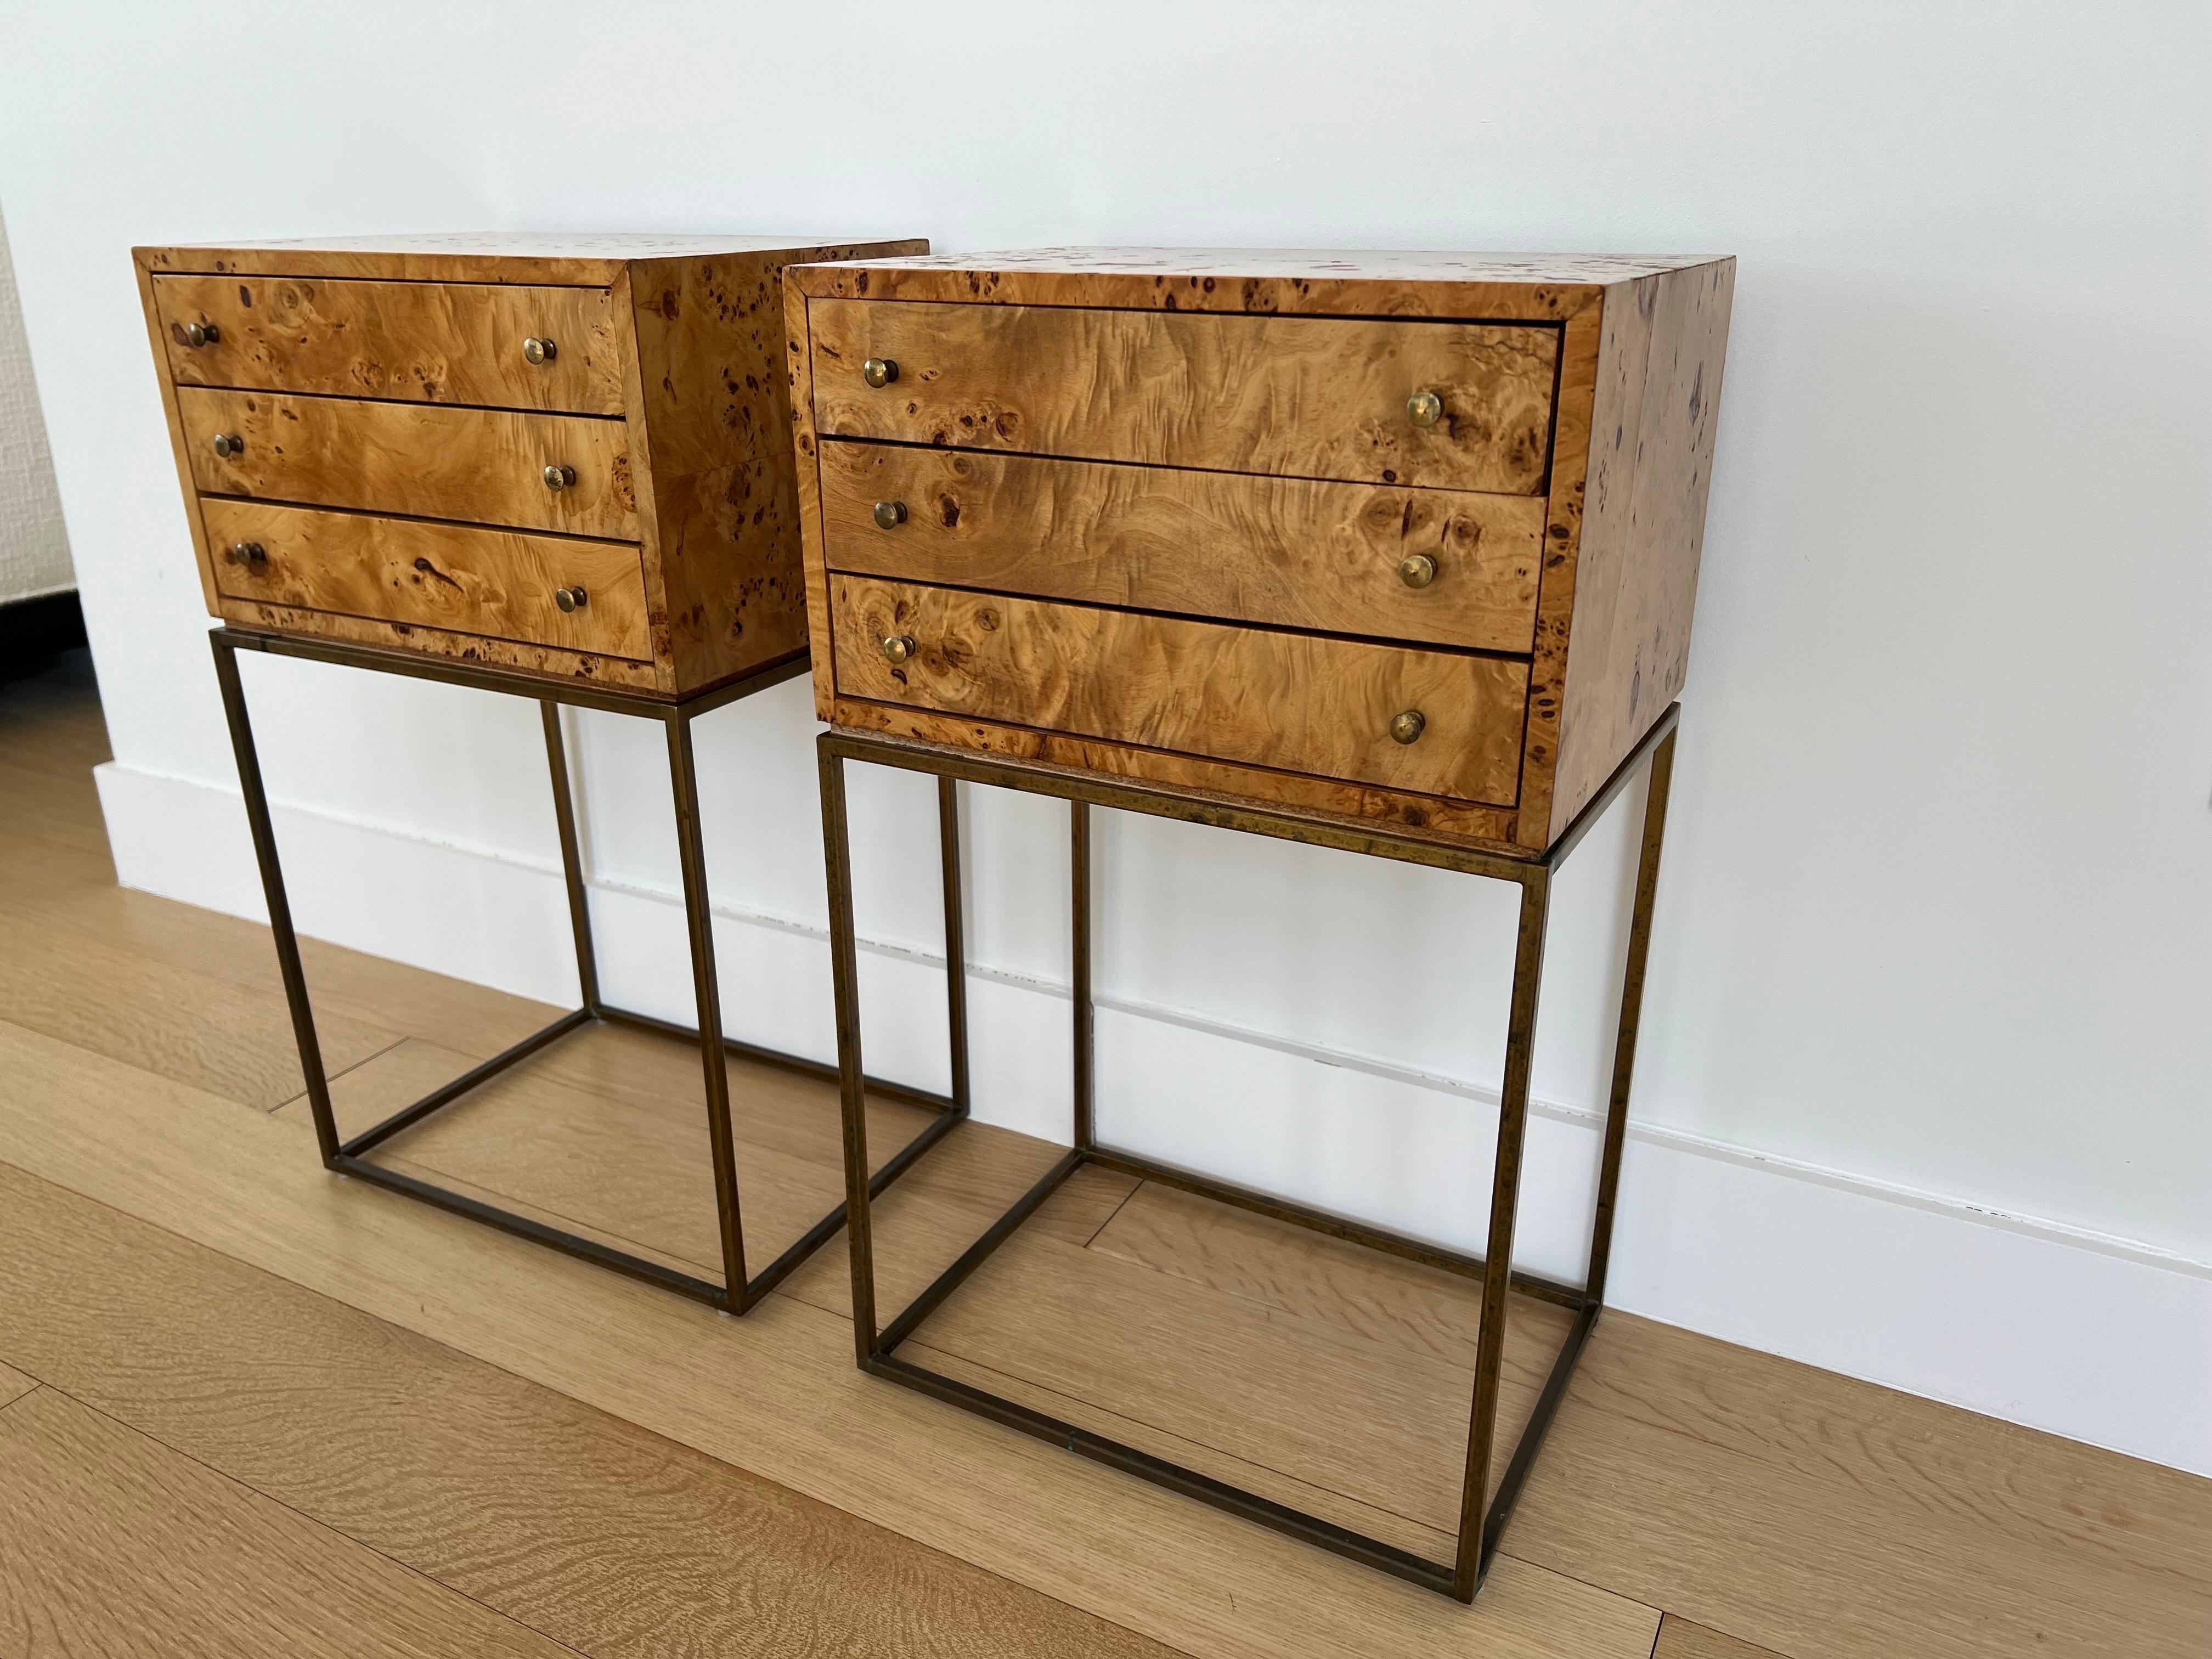 A pair of Milo Baughman burlwood jewelry chests or side tables. Wonderful patina to brass legs and hardware with a light stain on wood. Similar patina and wear to both and presents well together.